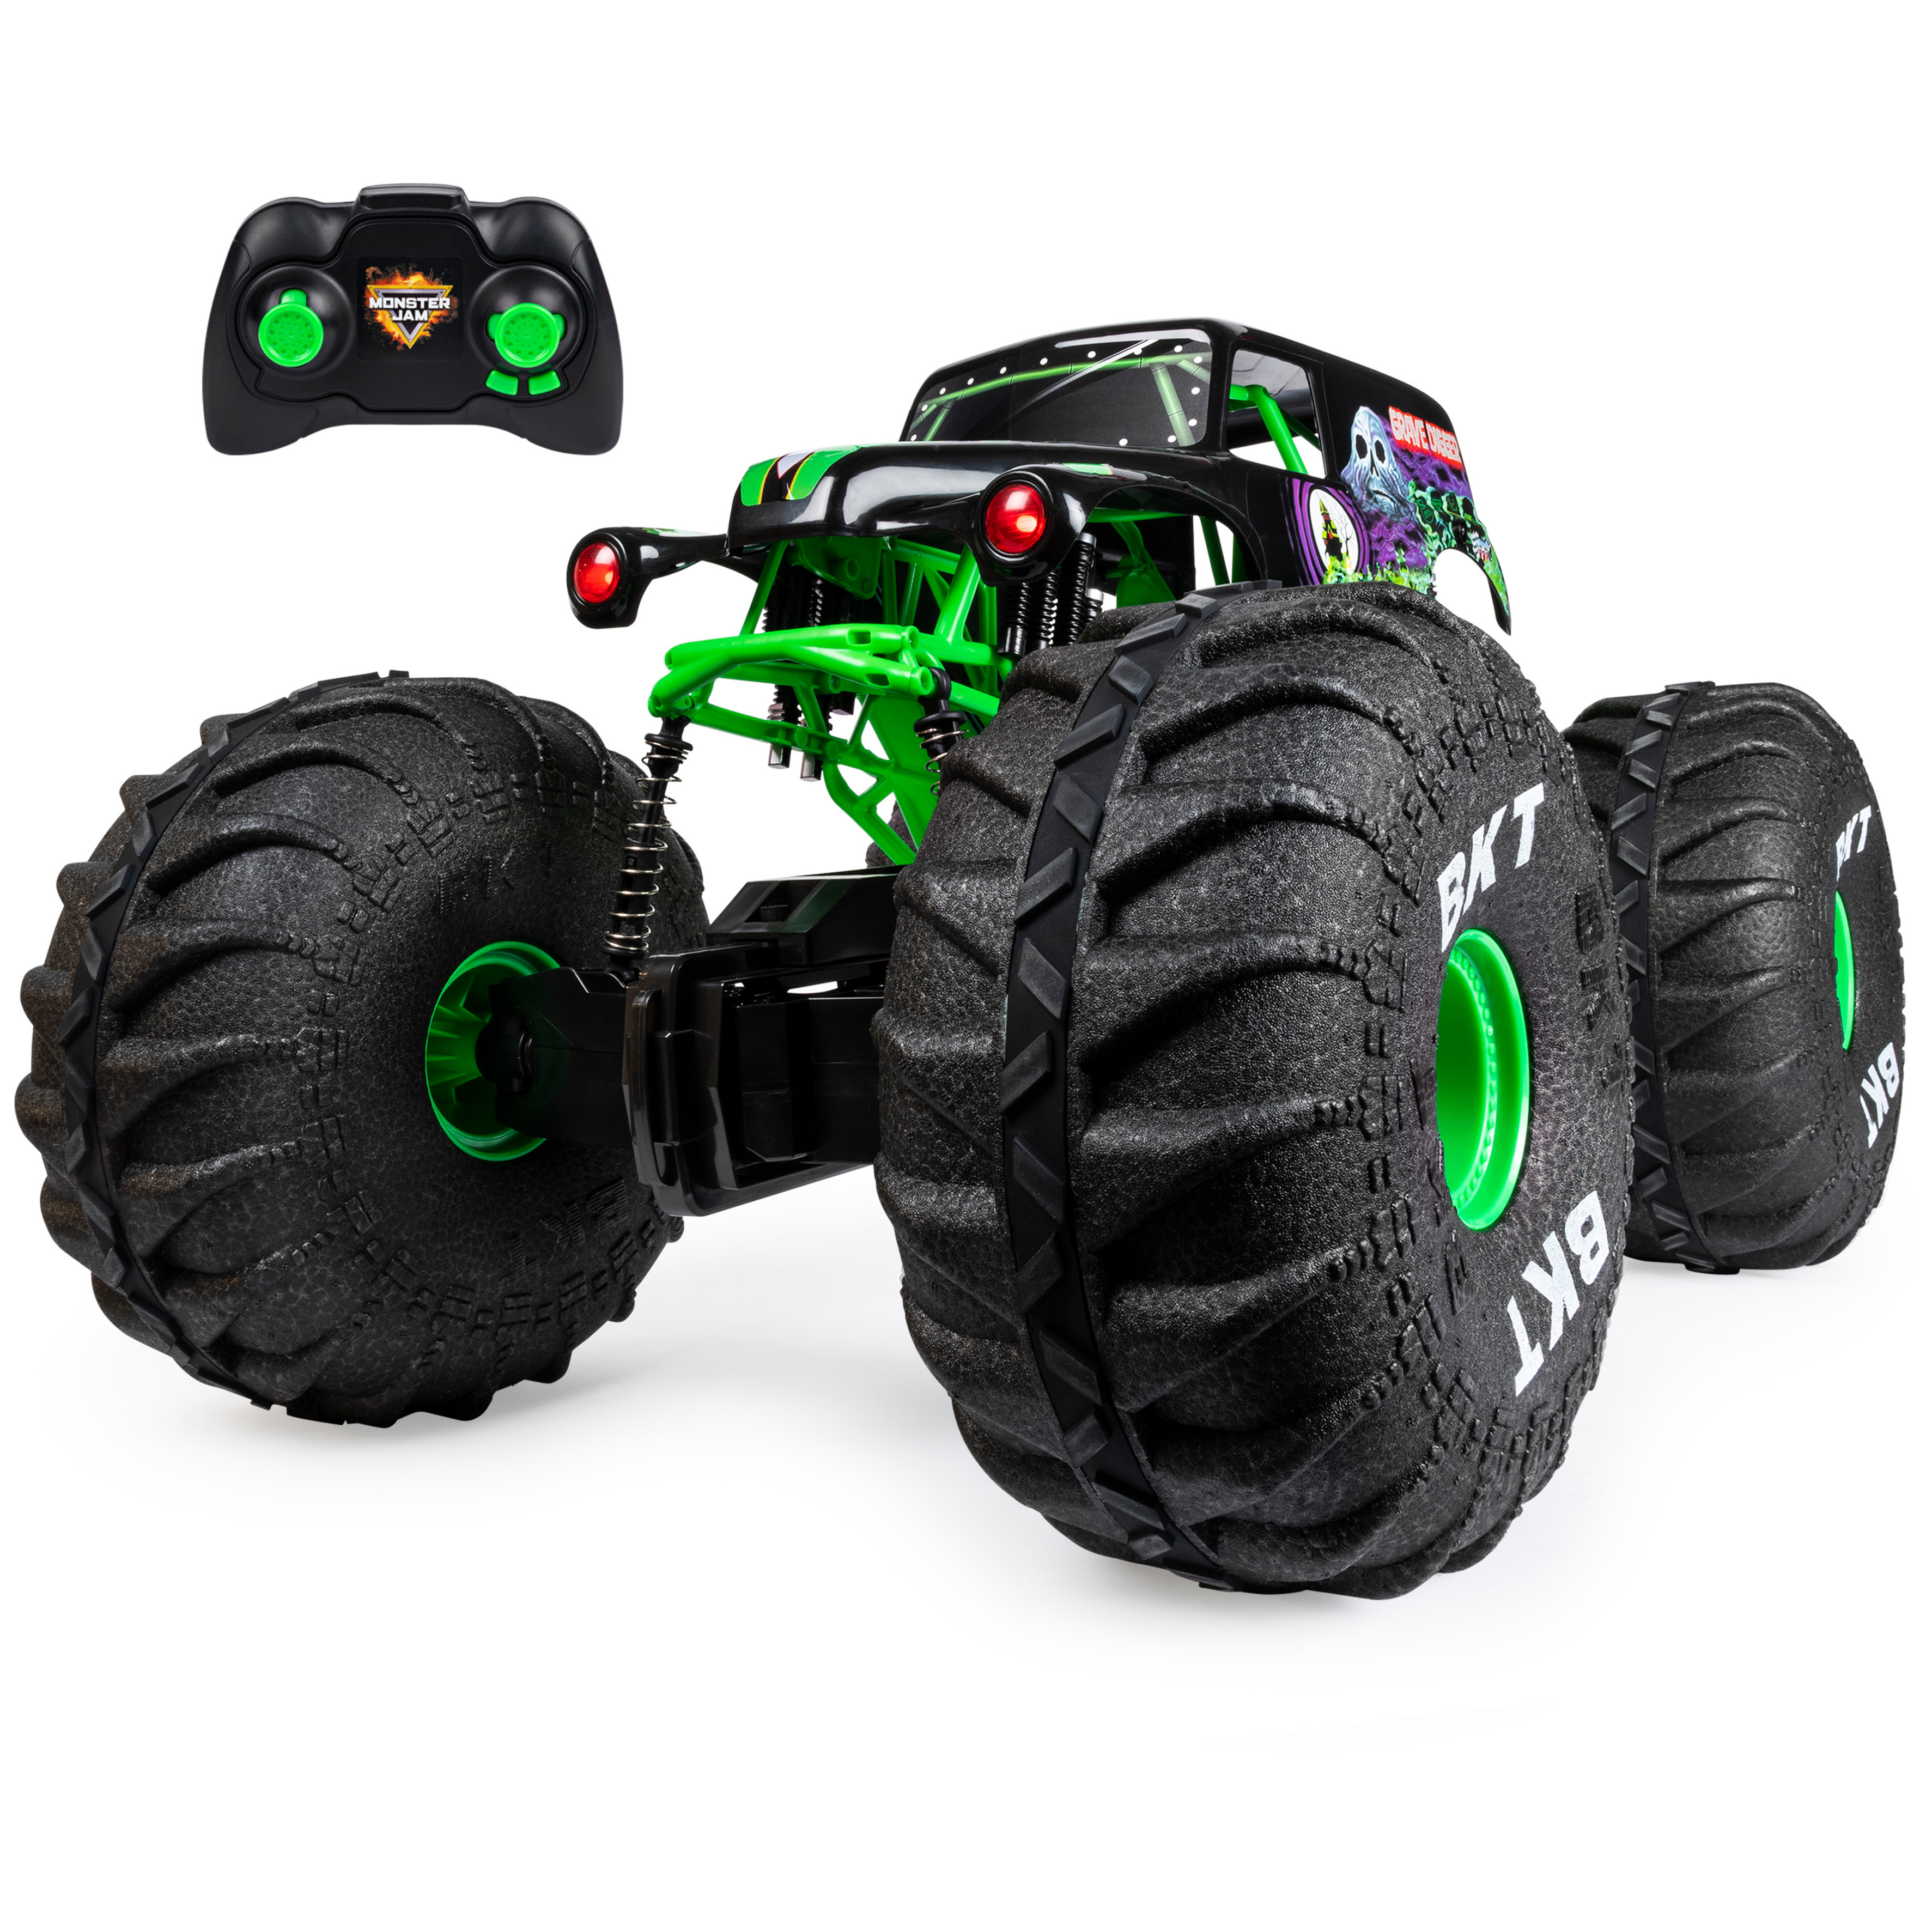 Monster Jam, Official Mega Grave Digger All-Terrain Remote Control Monster Truck with Lights, 1:6 Scale, Kids Toys for Boys and Girls Ages 4-6+  - image 1 of 9